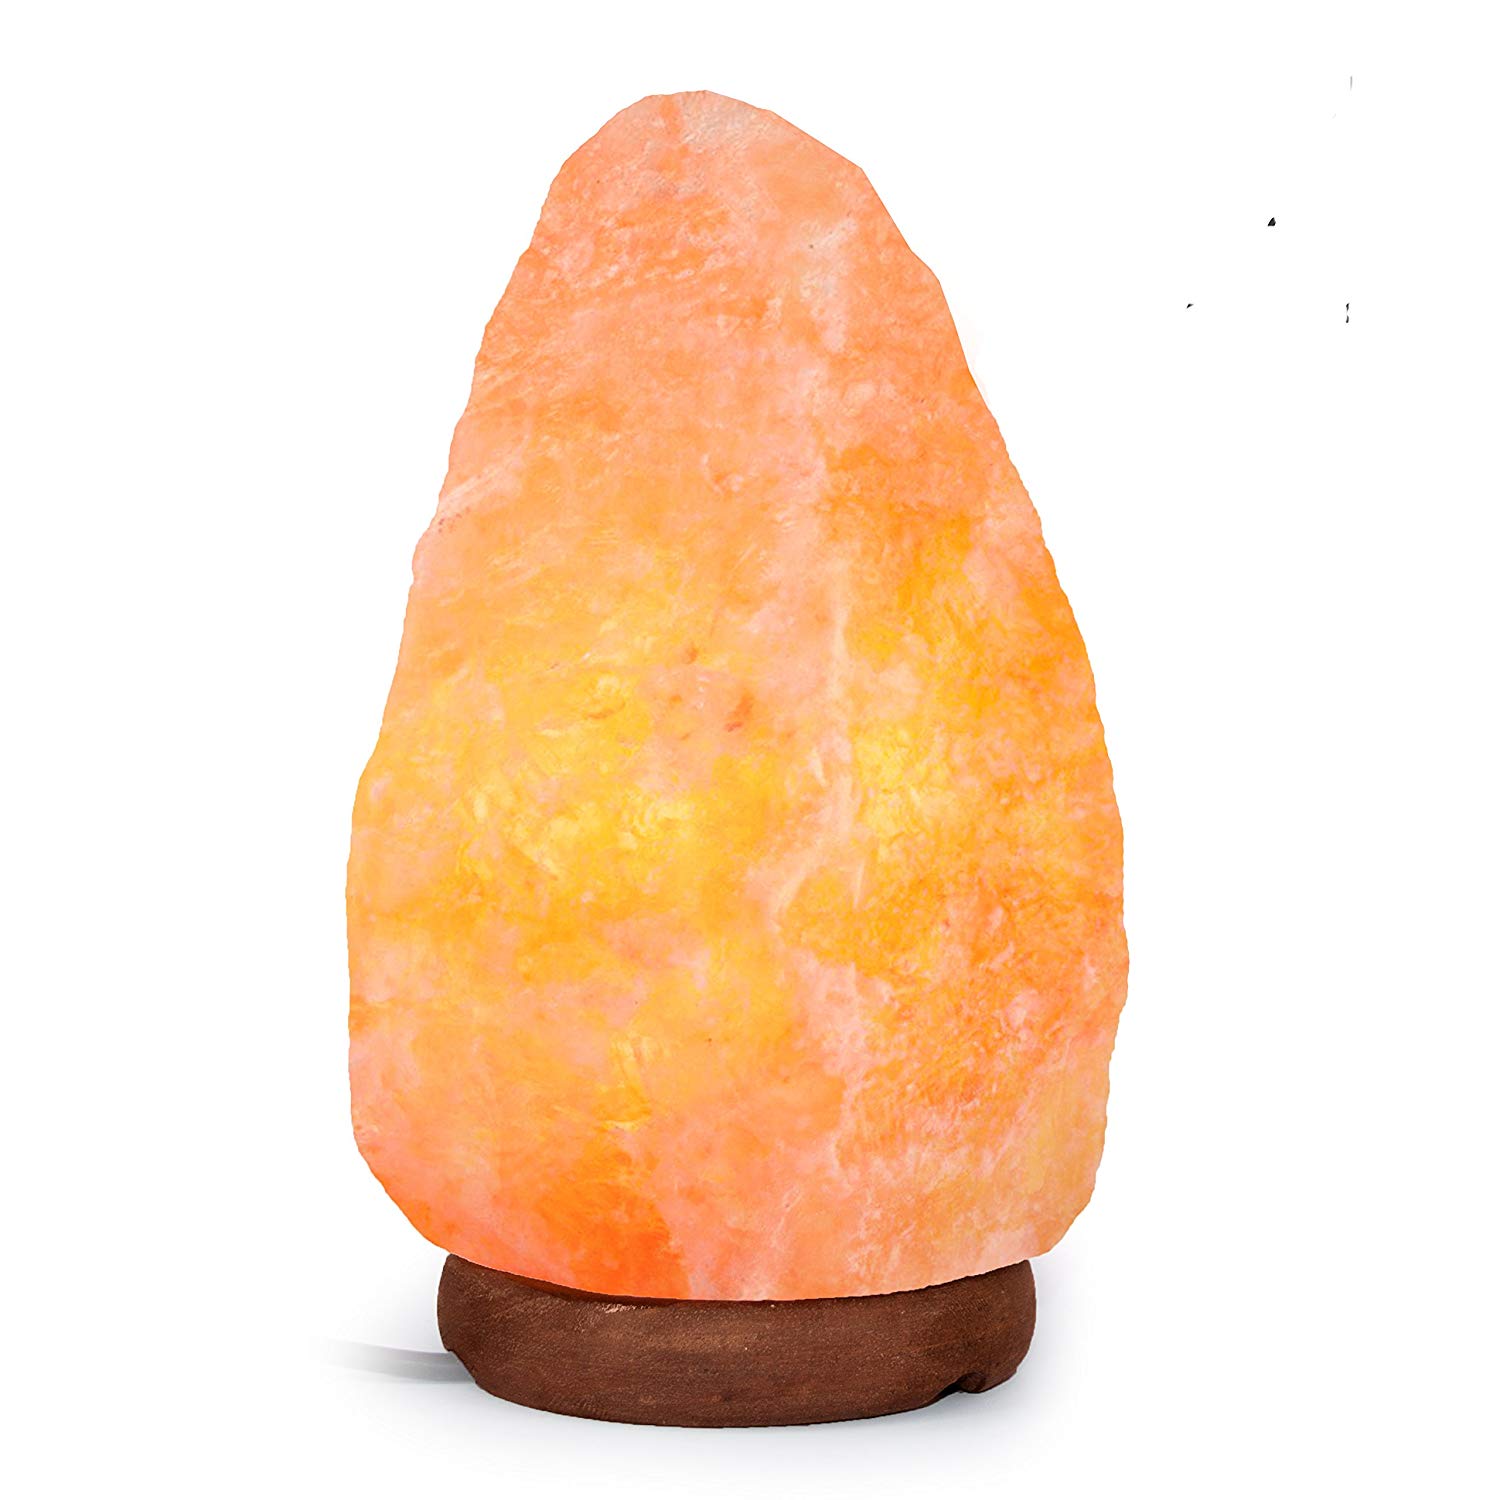 Light You saltlamp Himalayan Salt Lamp Natural Shape with Wooden Base and 6ft UL-Approved Dimmer Switch Cord-6 to 8 inches - salt lamps